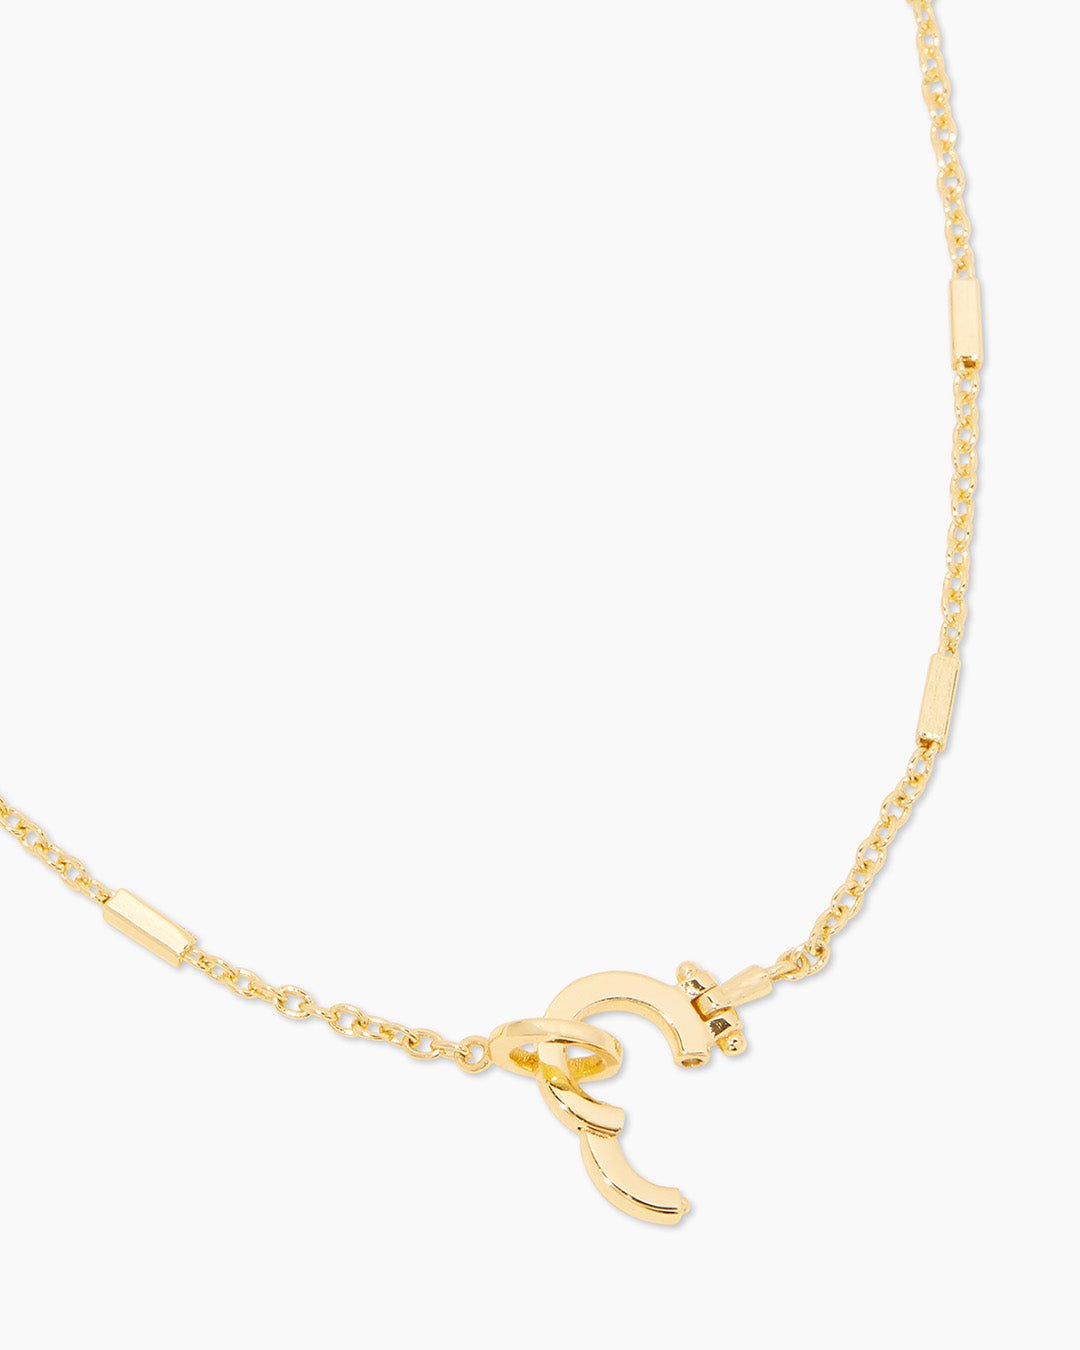 Tatum Necklace Textured chain necklace || option::Gold Plated